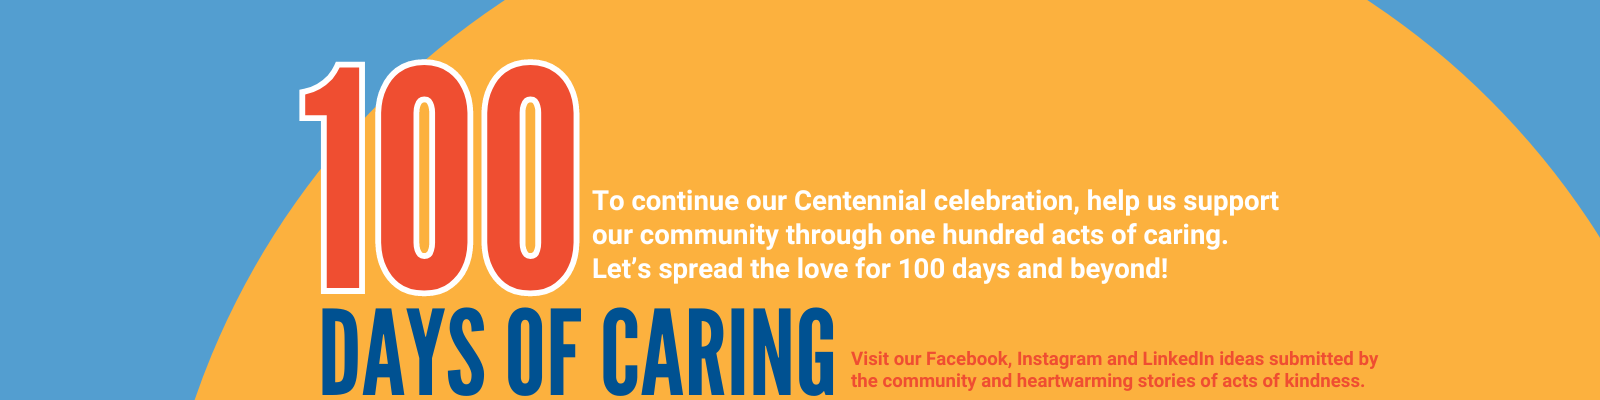 100 days of caring banner